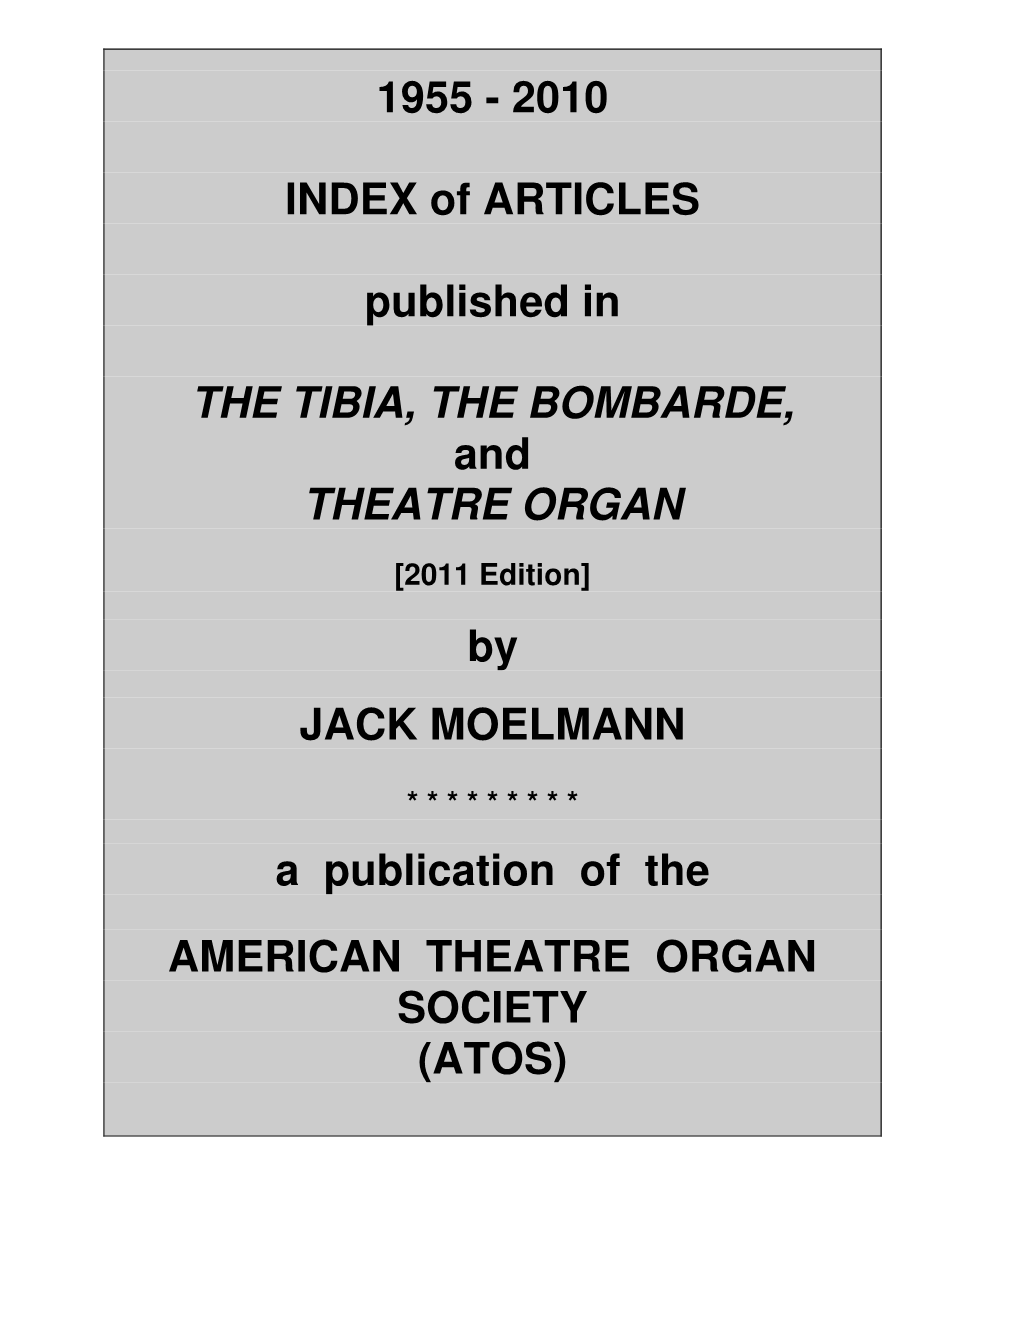 2010 INDEX of ARTICLES Published